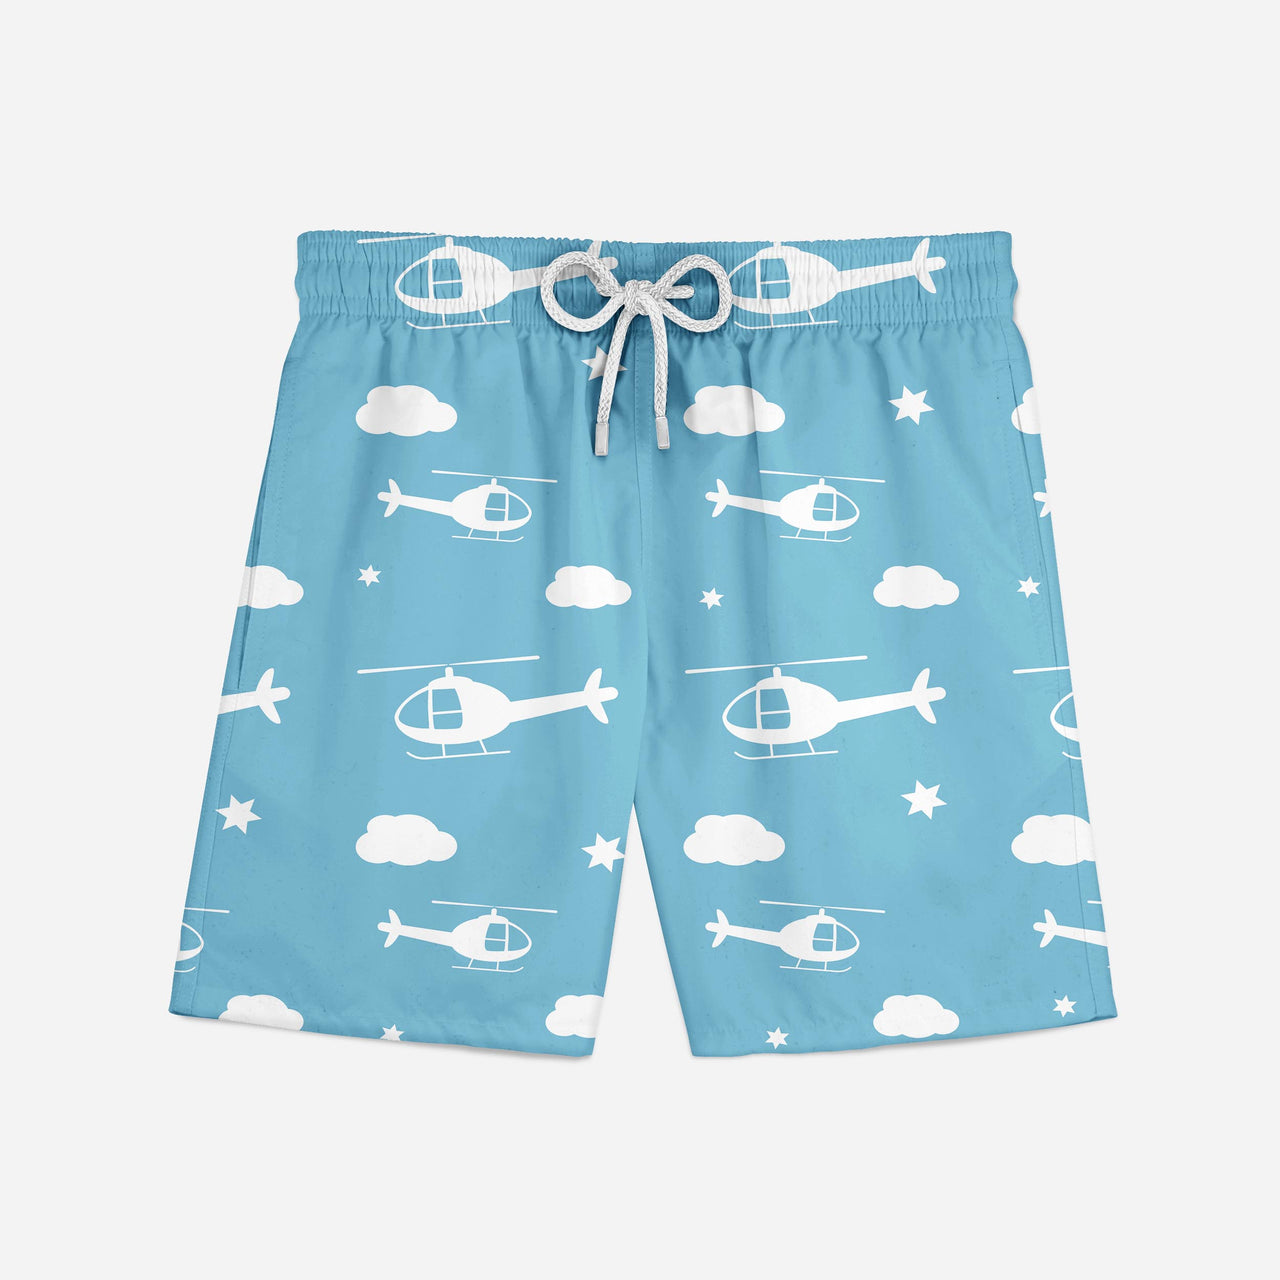 Helicopters & Clouds Designed Swim Trunks & Shorts